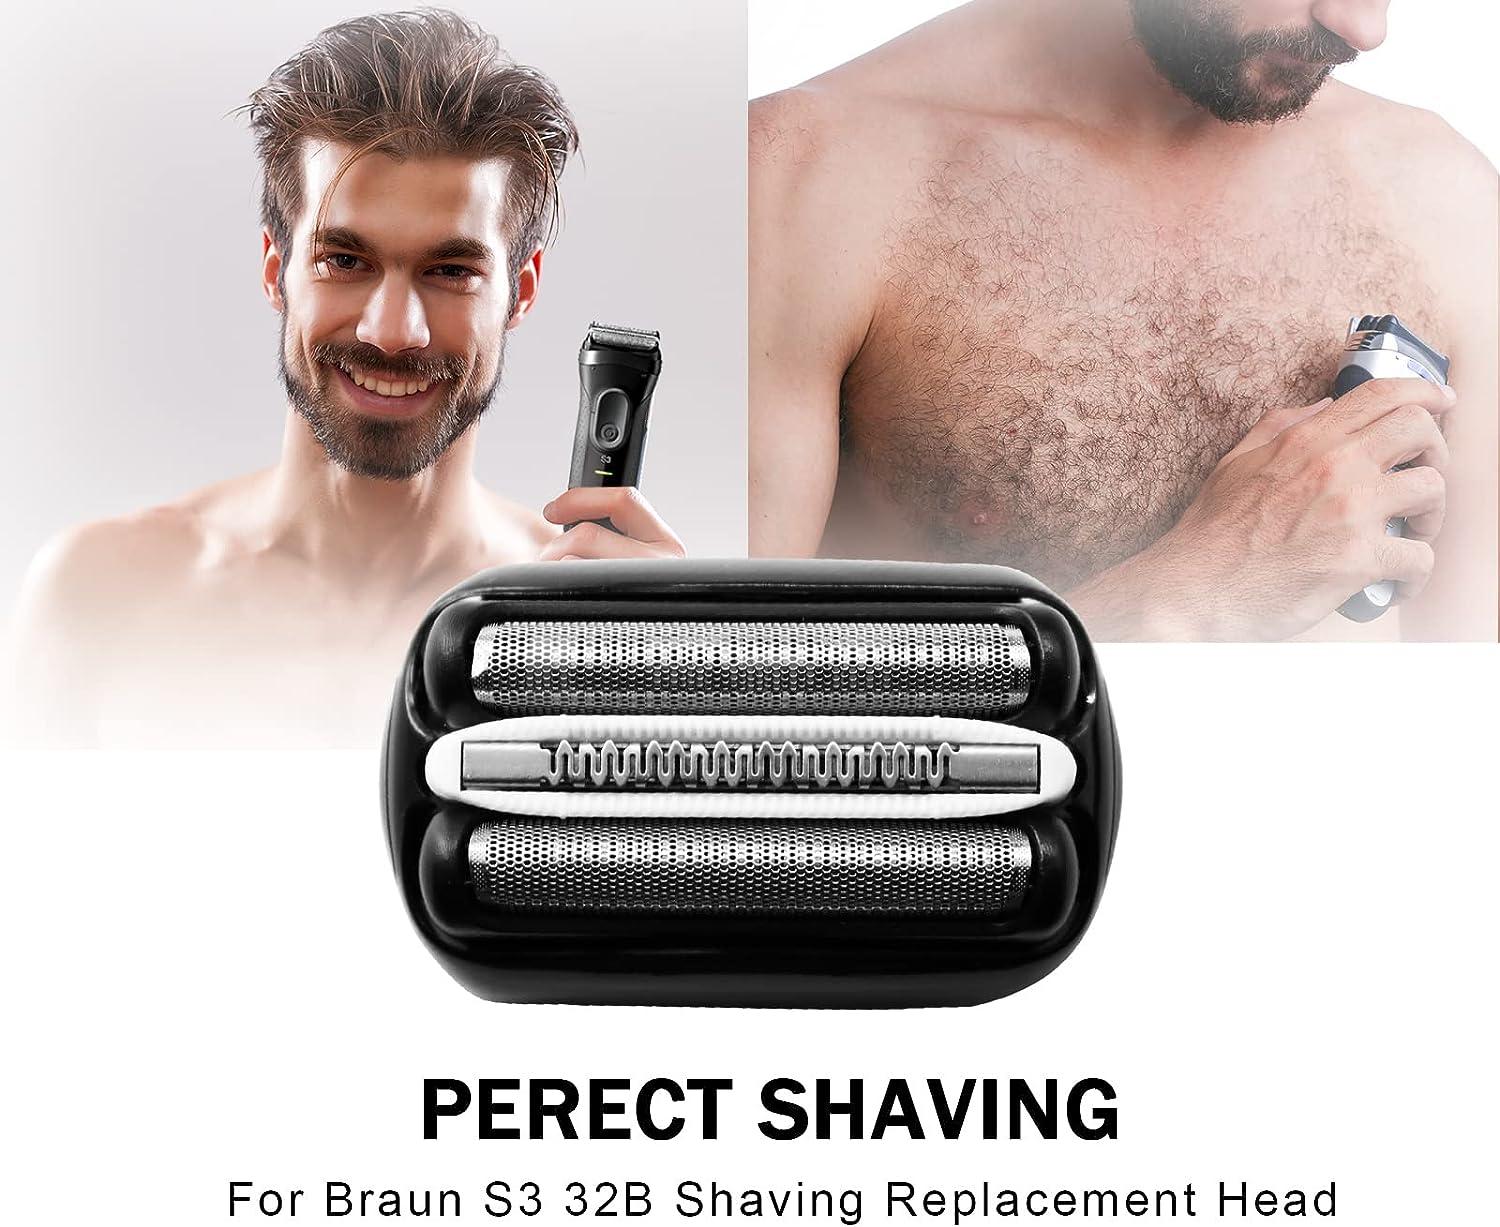 32B S3 Electric Replacement Shaver Head Accessories for Braun Series3 Shaving  Razor Head, Suitable for Braun S3 3040s 3000s 3050cc 3010s 3070cc 3080s  3090s 310s 3020s 330s 370cc-4 380s-4, 3090cc Etc.